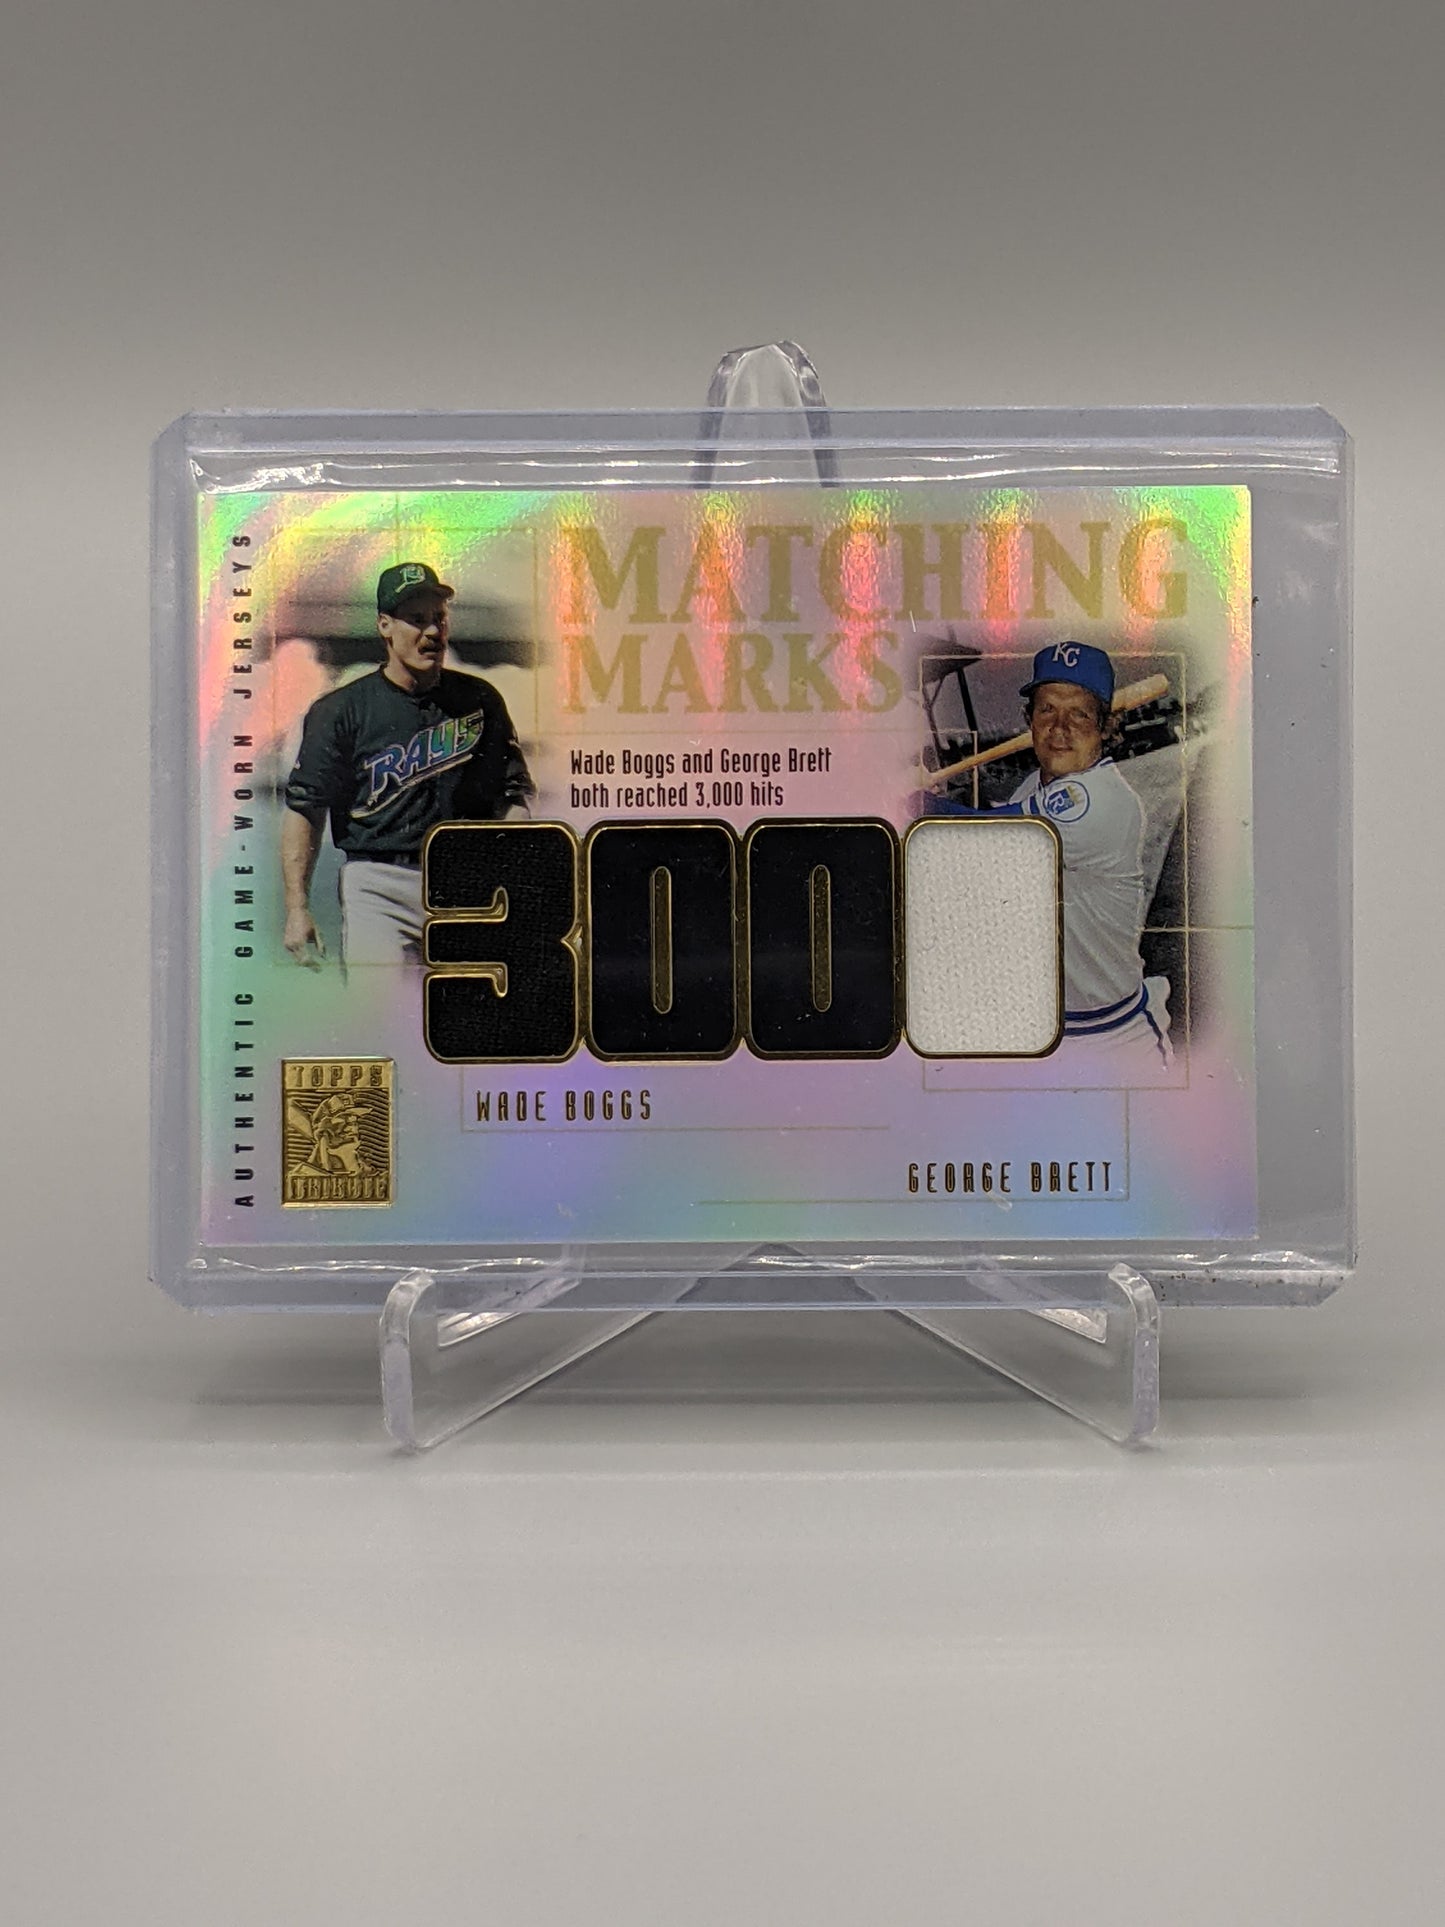 2002 Topps Tribute Matching Marks #MM-BB Wade Boggs/George Brett